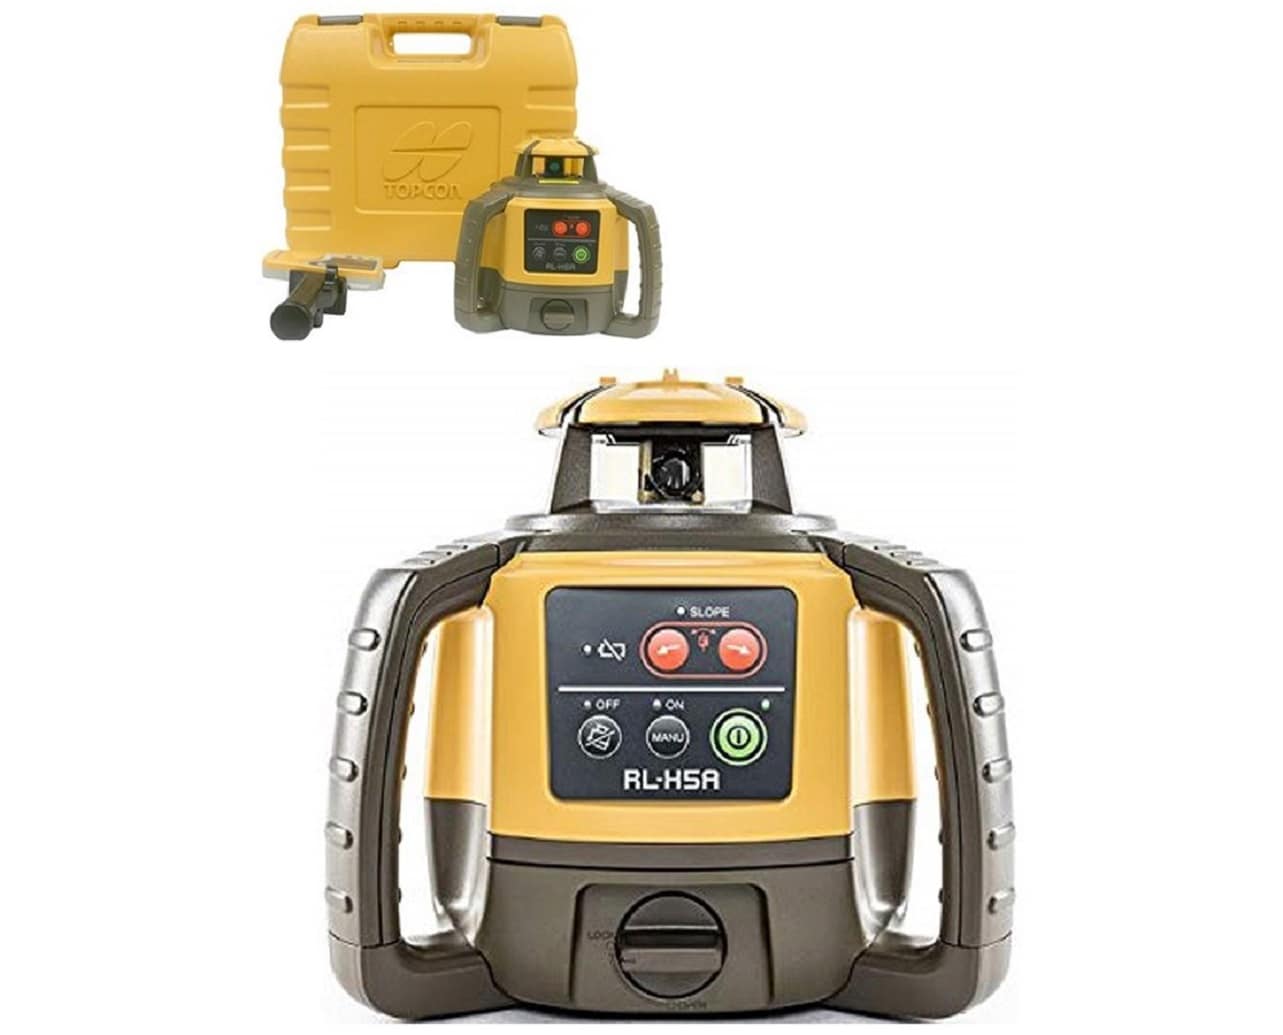 TRANSIT,RL-H4C,INCH NEW TOPCON RL-H5B SELF-LEVELING ROTARY LASER LEVEL PACKAGE 